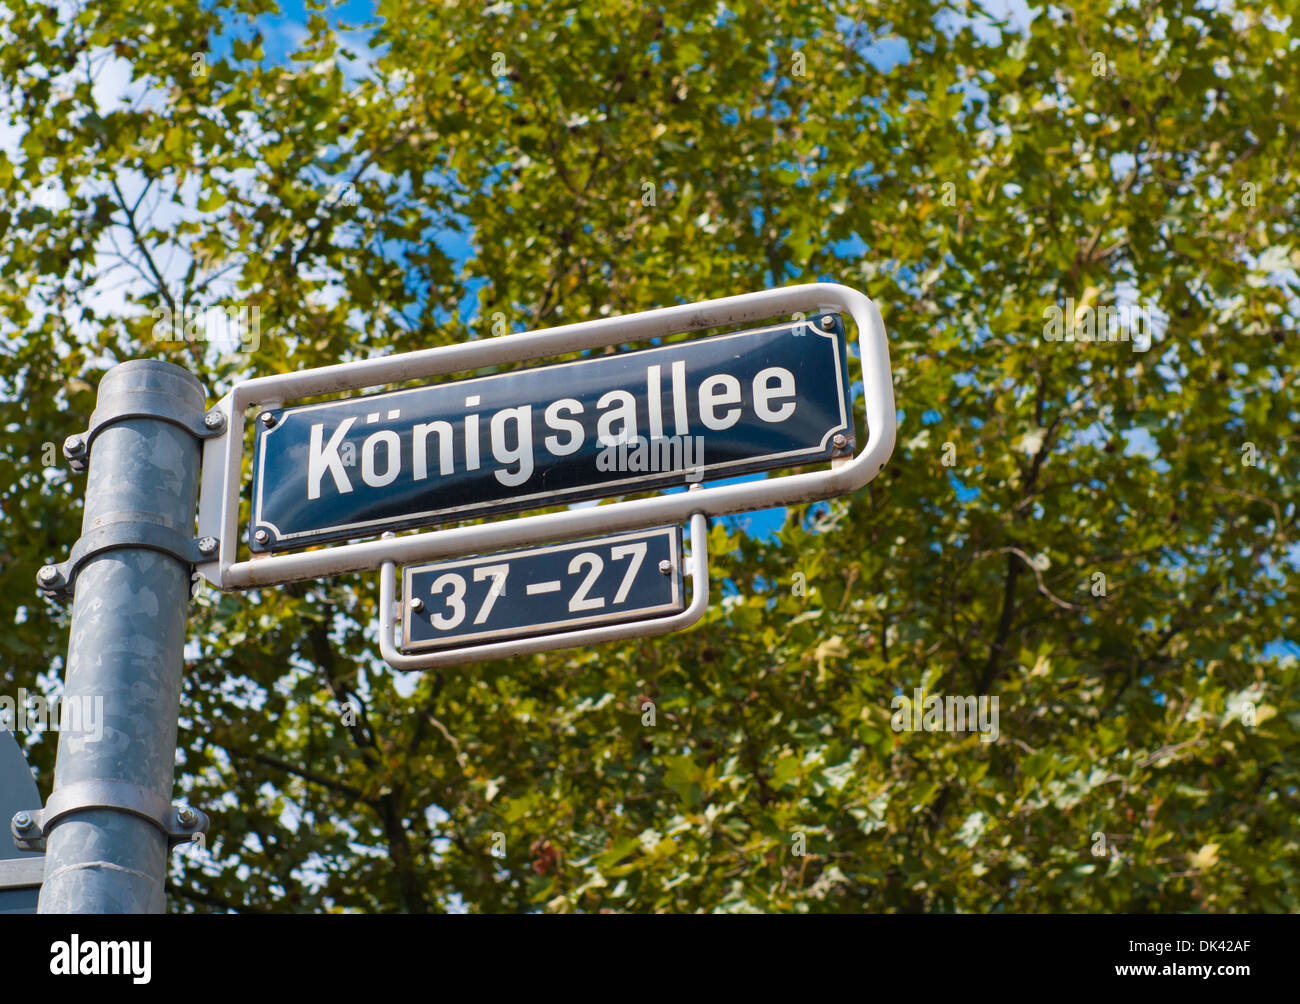 street name sign of the famous konigsallee in Dusseldorf, Germany Stock Photo